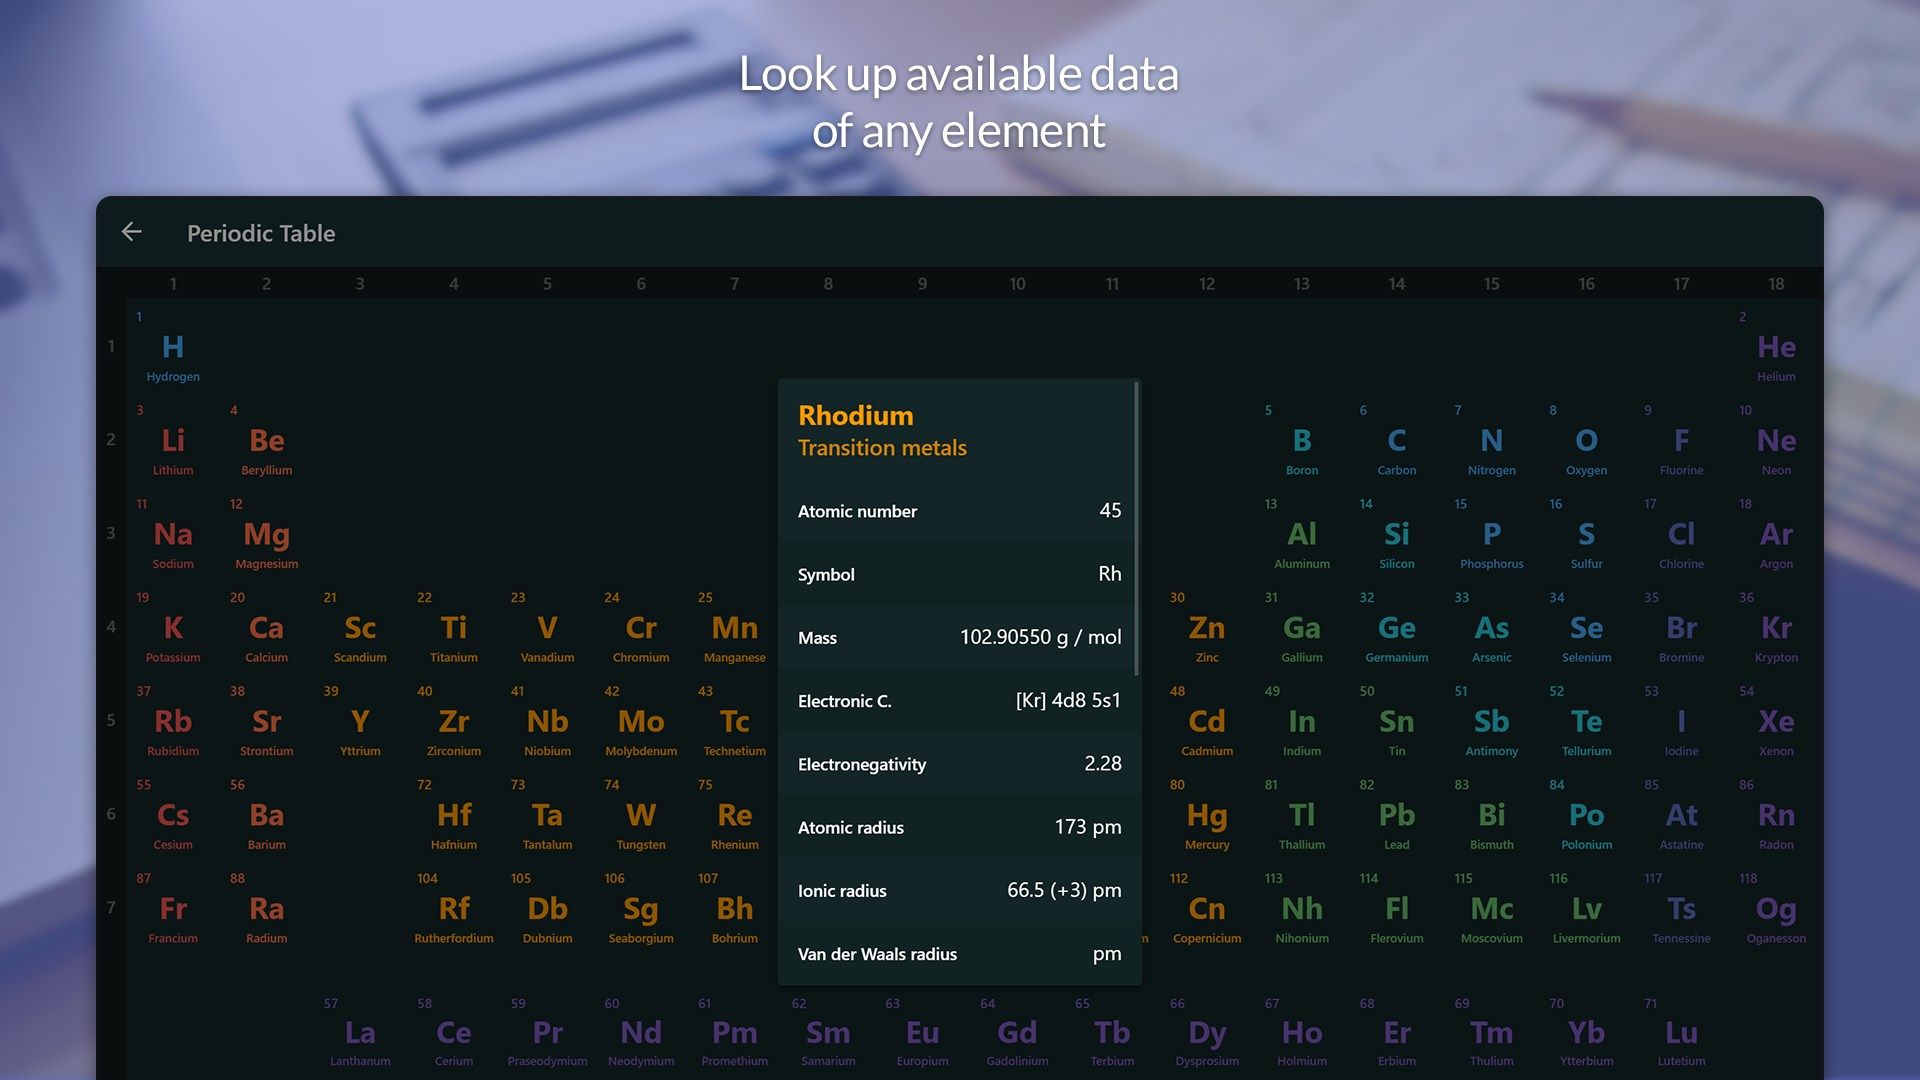 Look up available data of any element